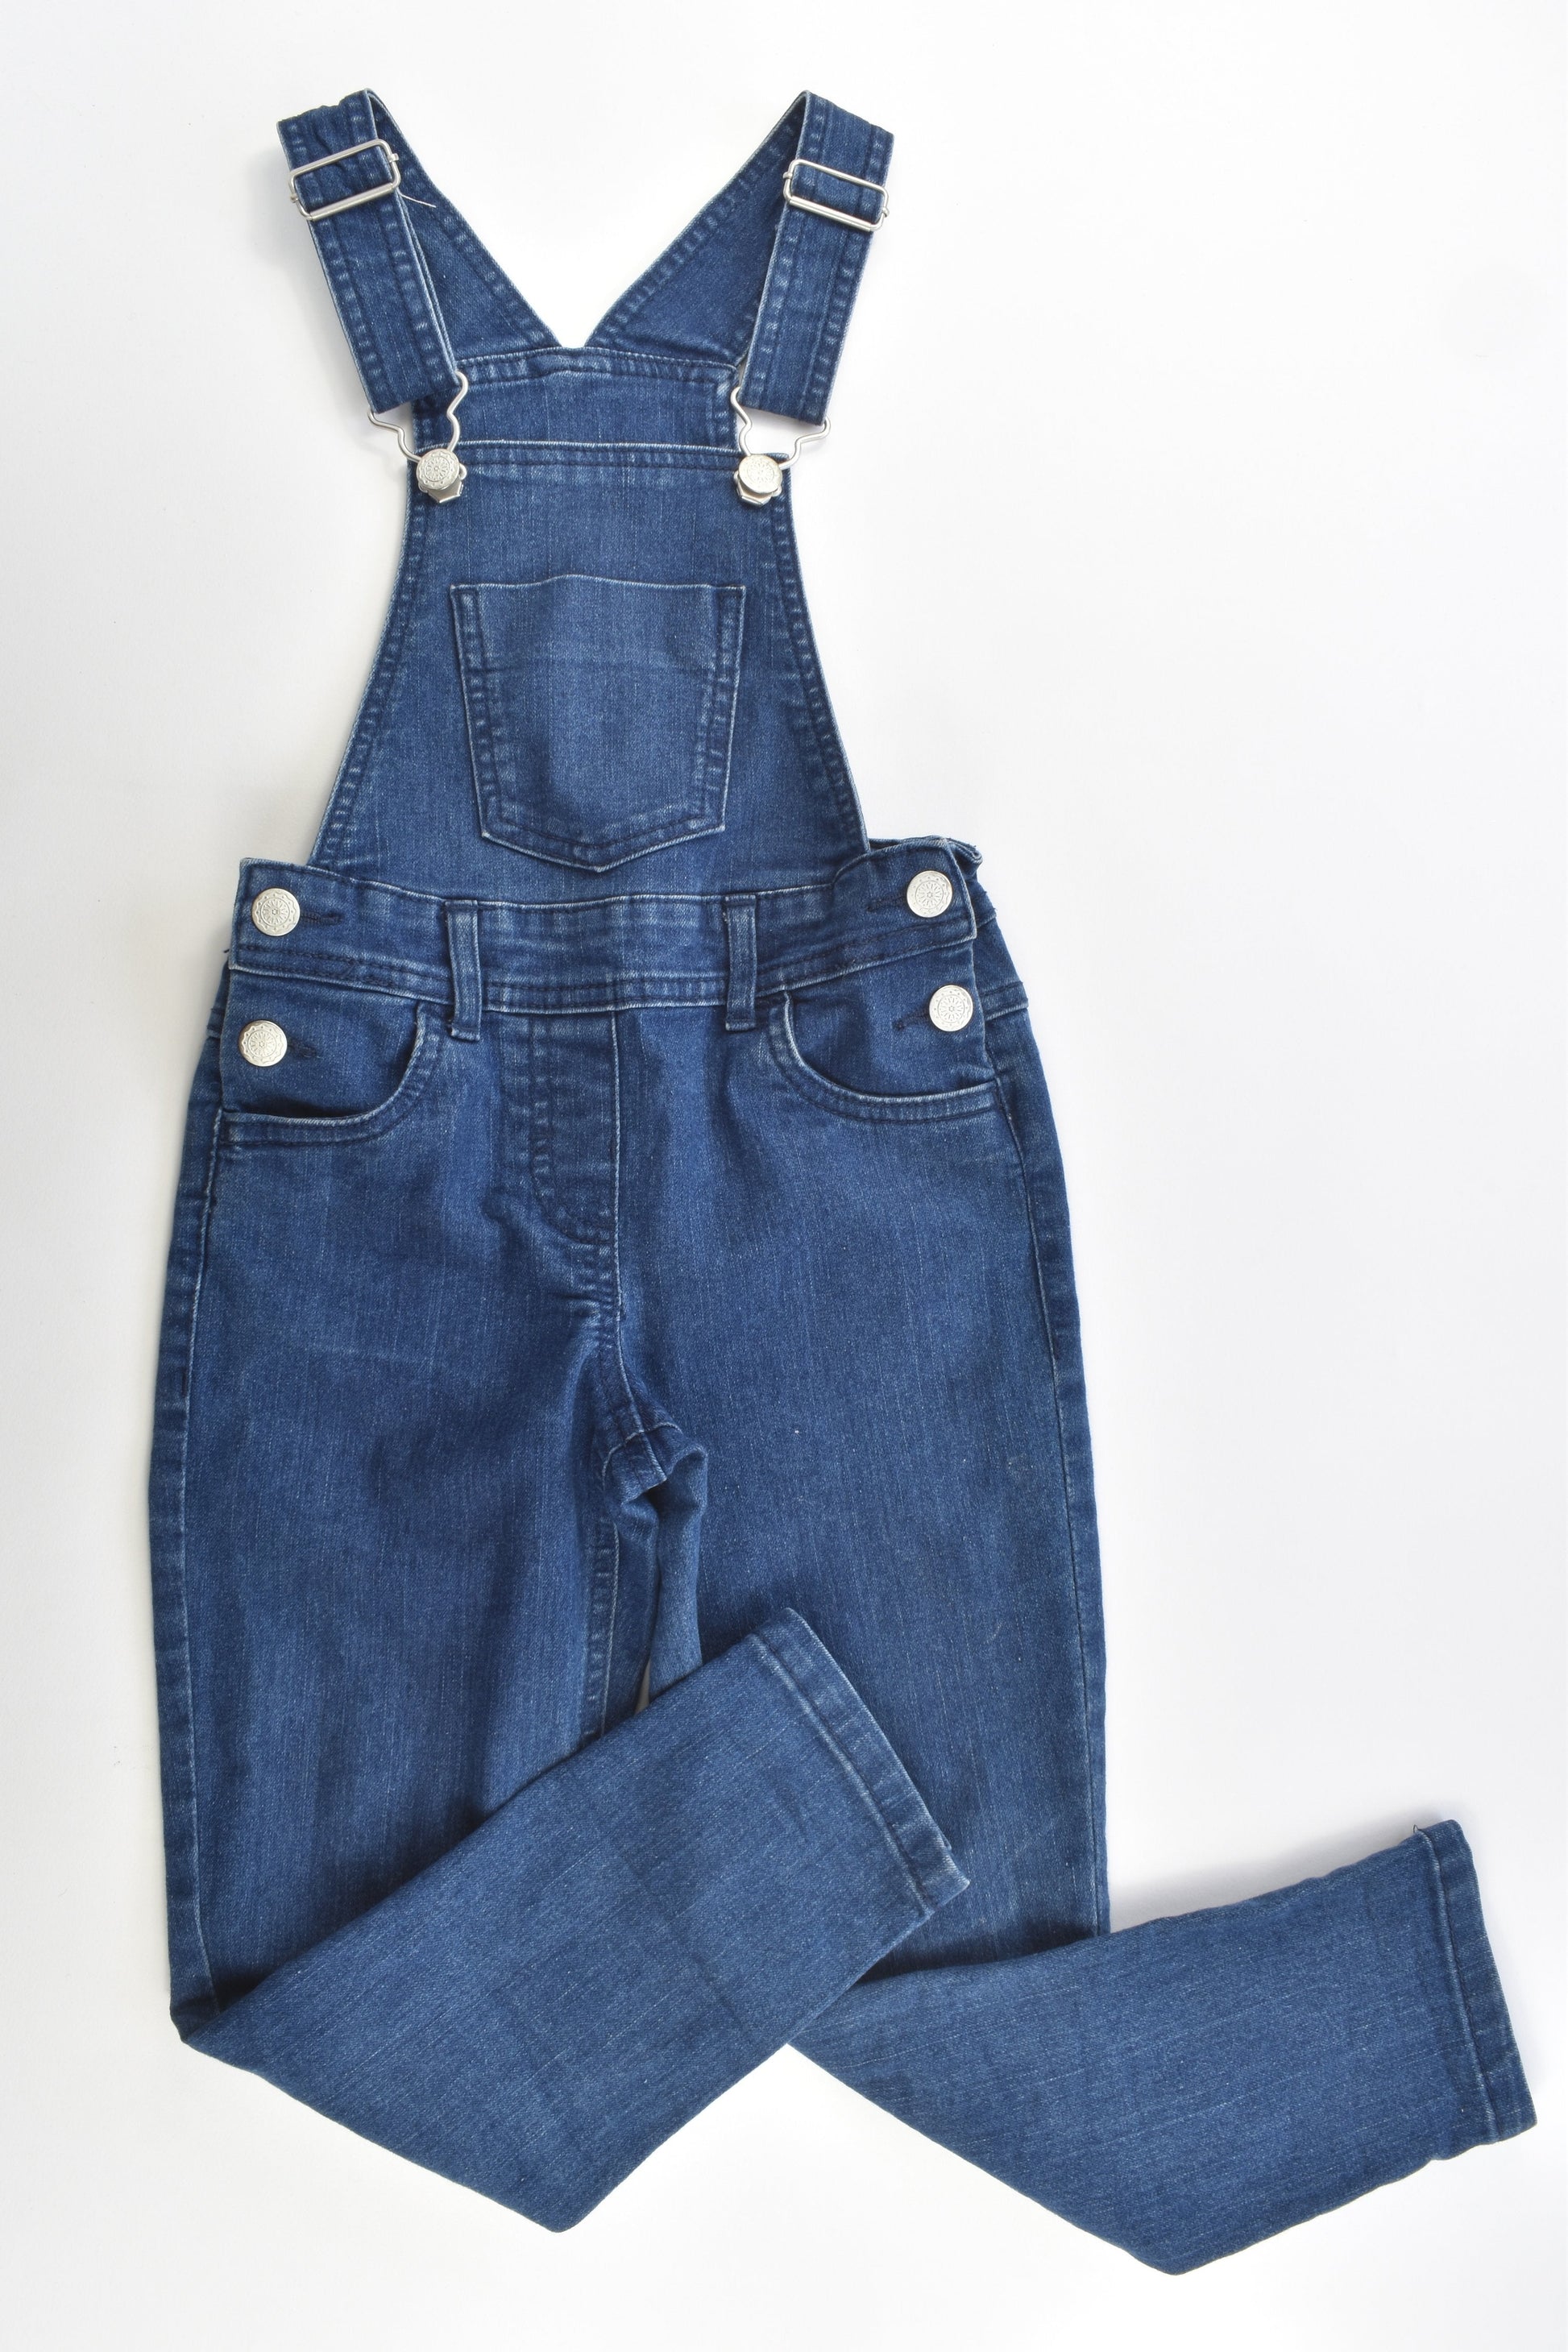 H&T Size 6 Stretchy Denim Overalls